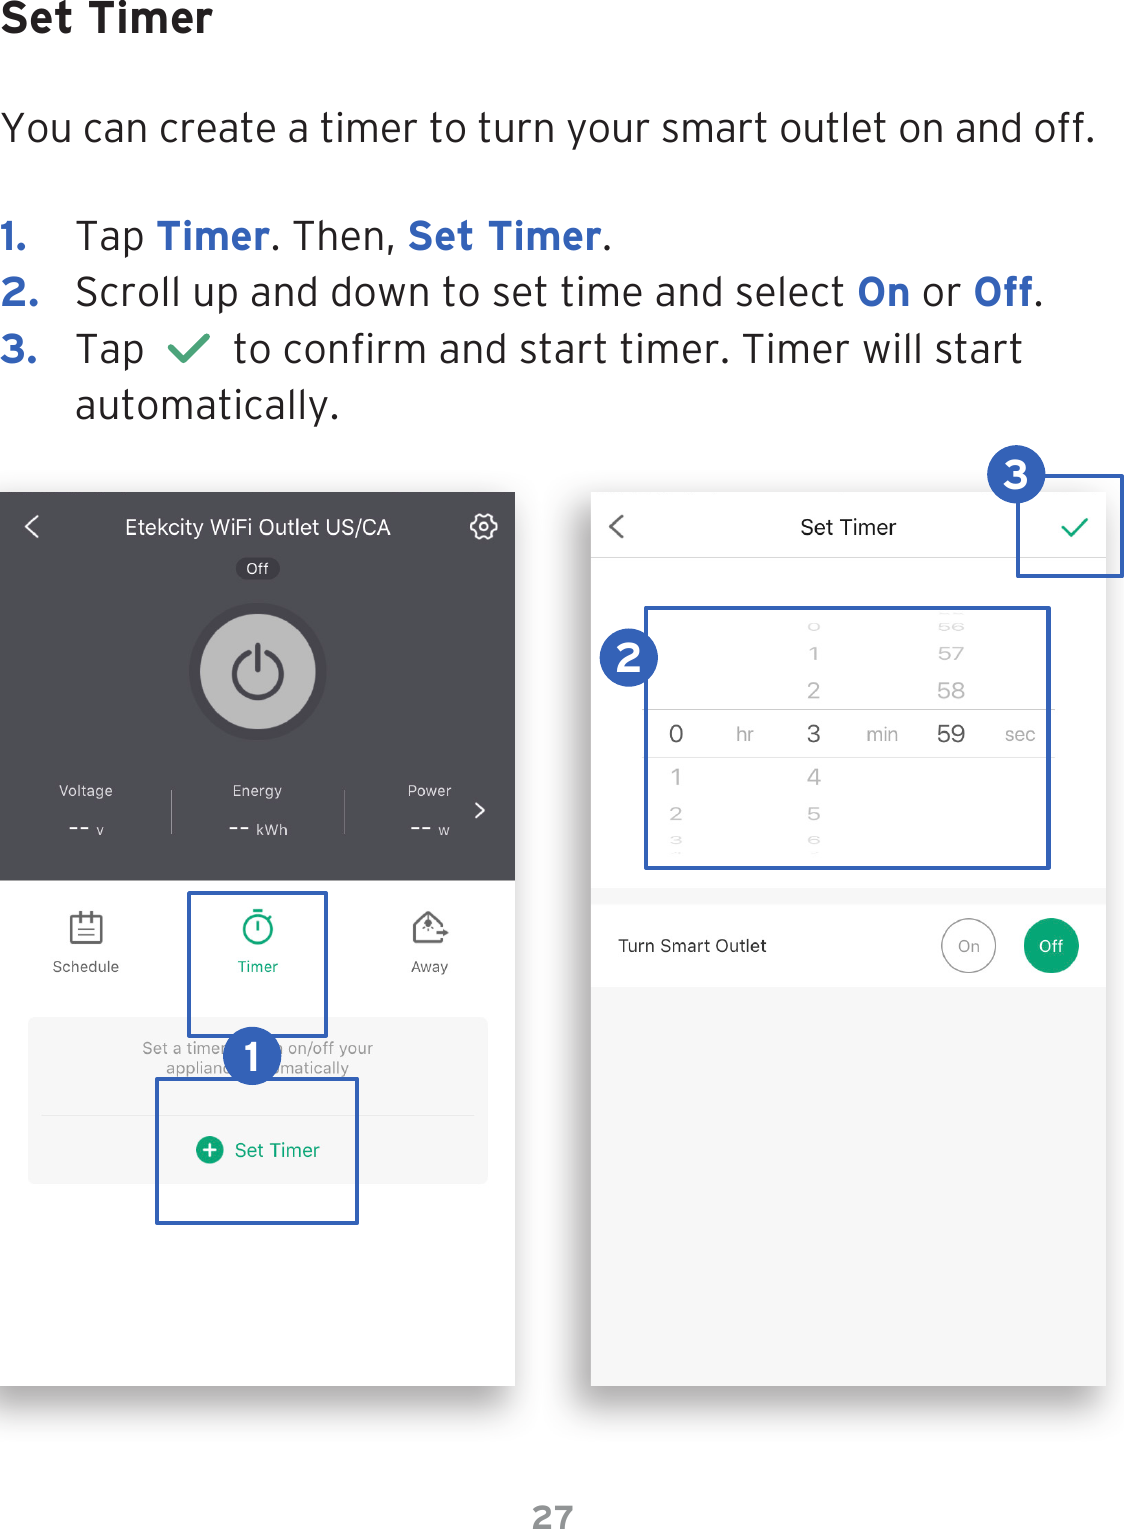 27Set TimerYou can create a timer to turn your smart outlet on and off.1.  Tap Timer. Then, Set Timer.2.  Scroll up and down to set time and select On or Off. 3.  Tap     to conrm and start timer. Timer will start automatically.123